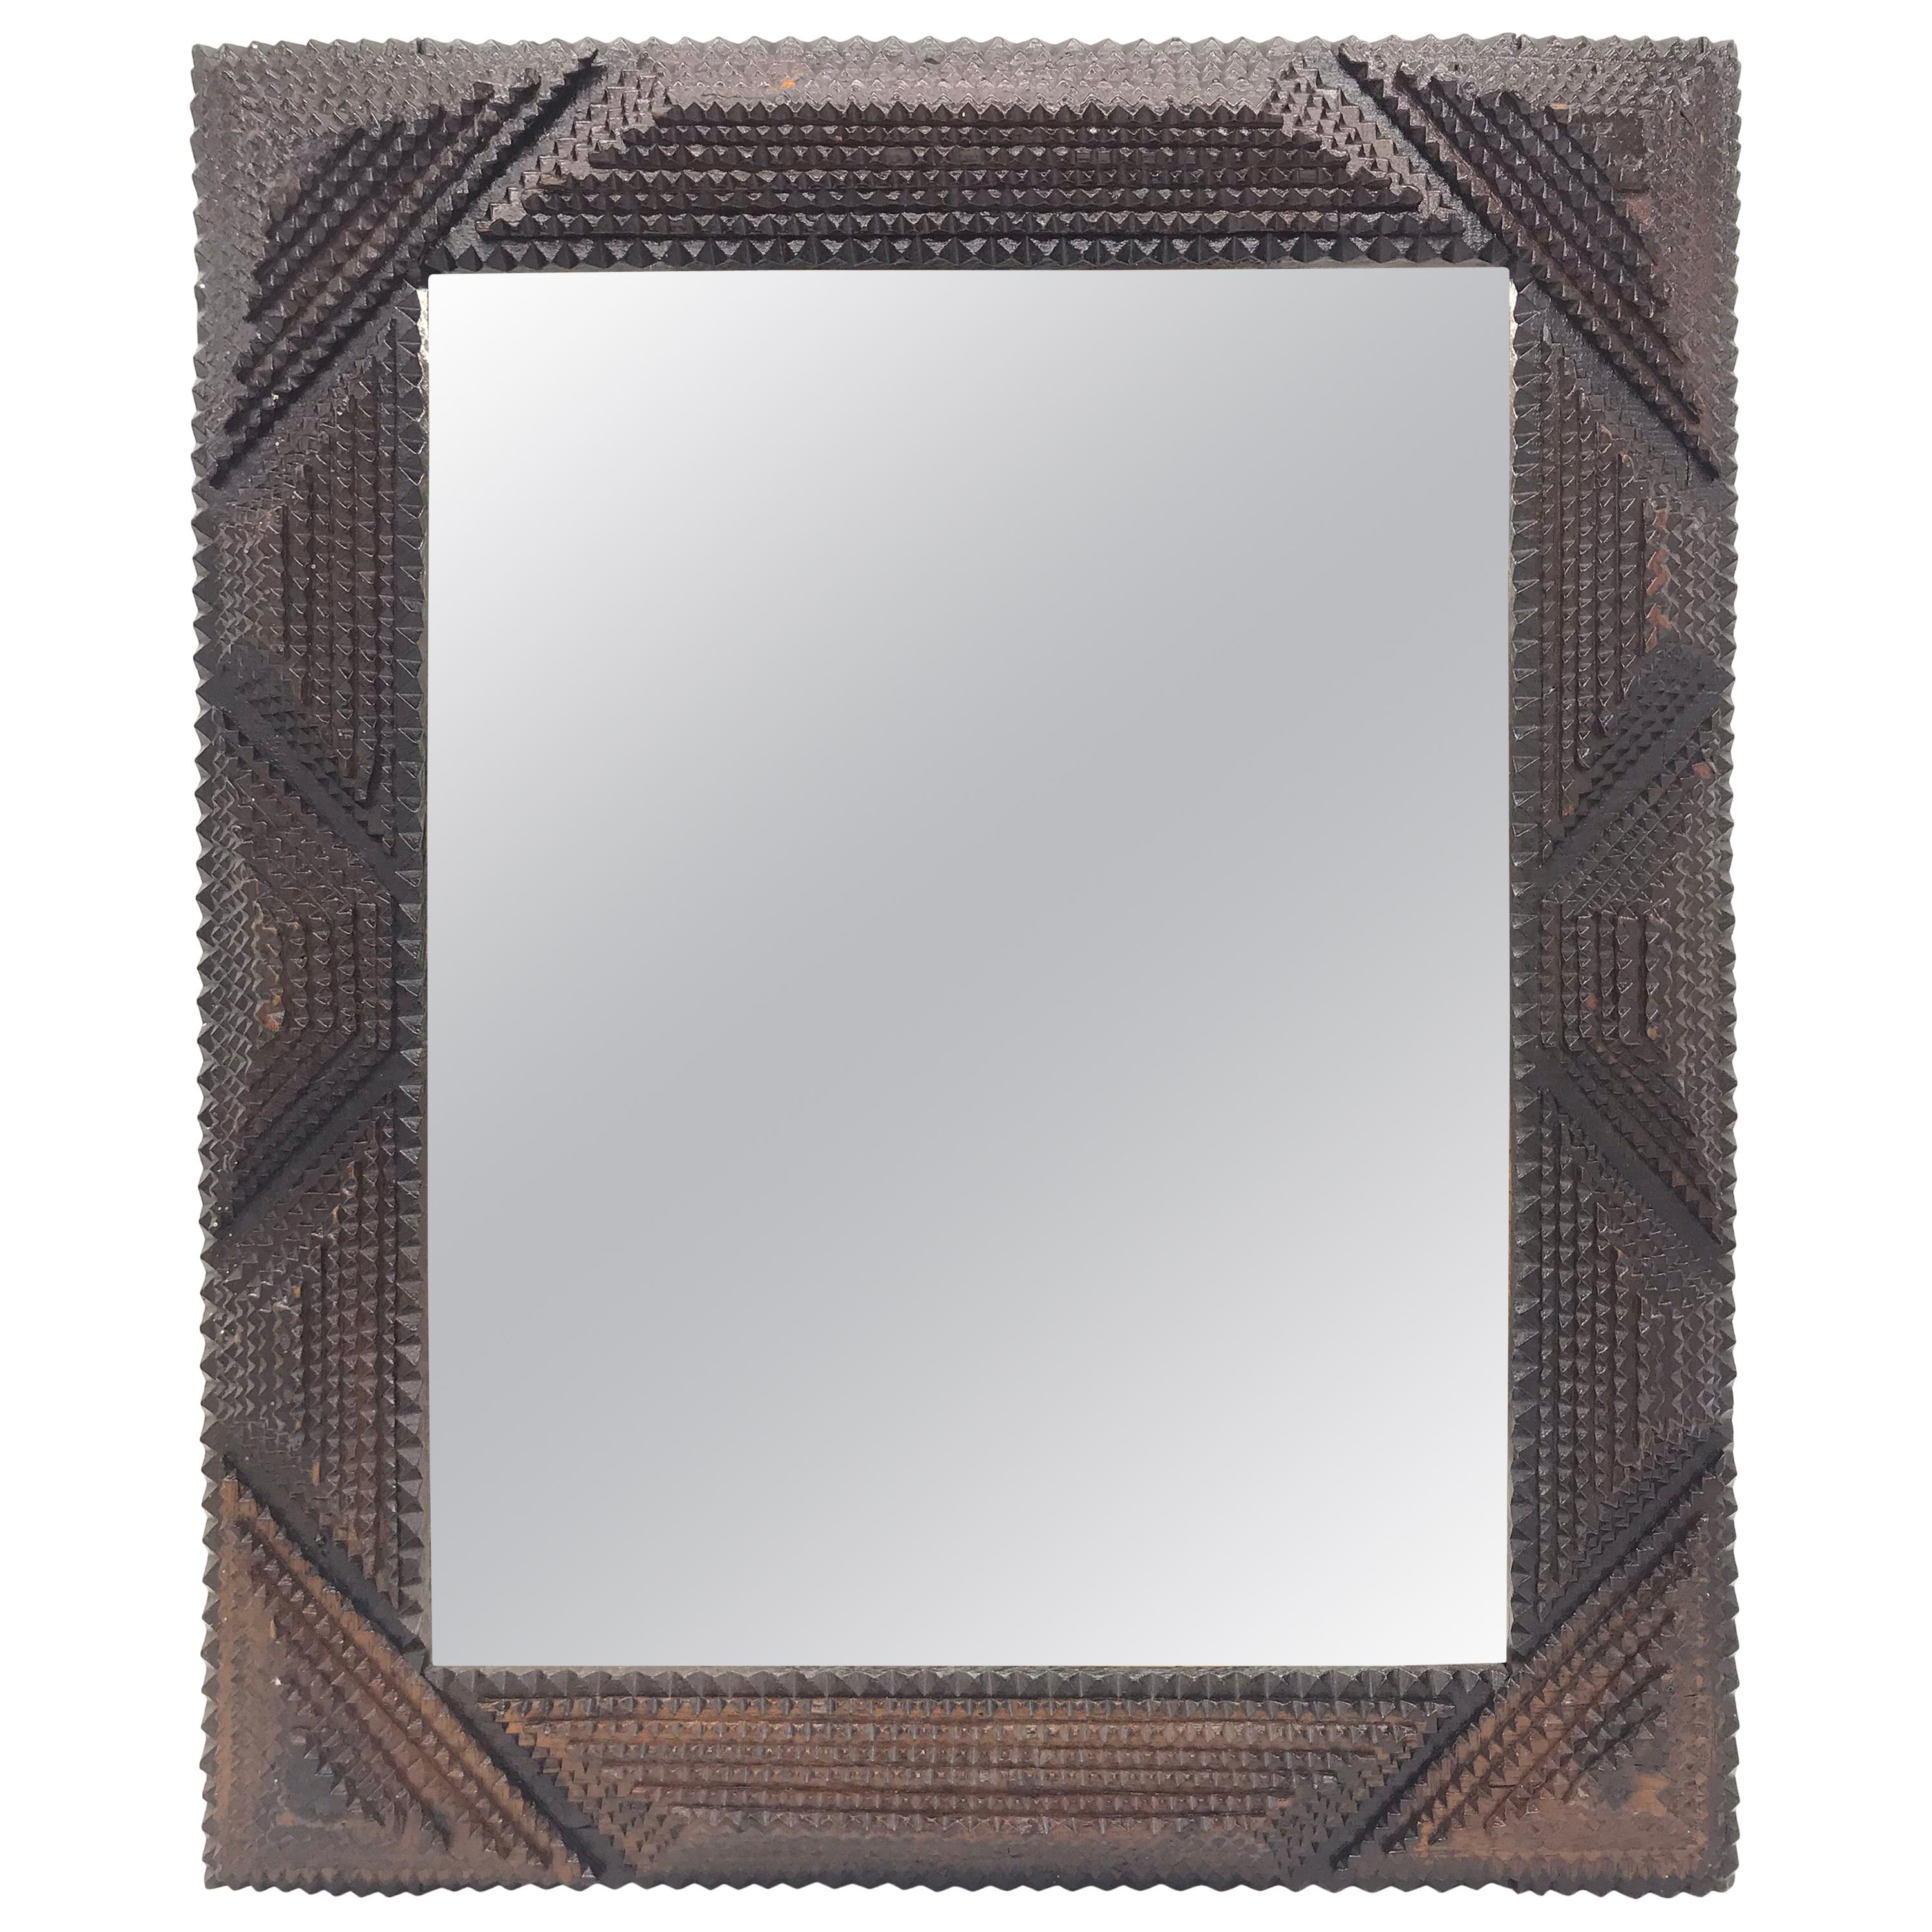 Antique Tramp Art Mirror from the Early 1900s